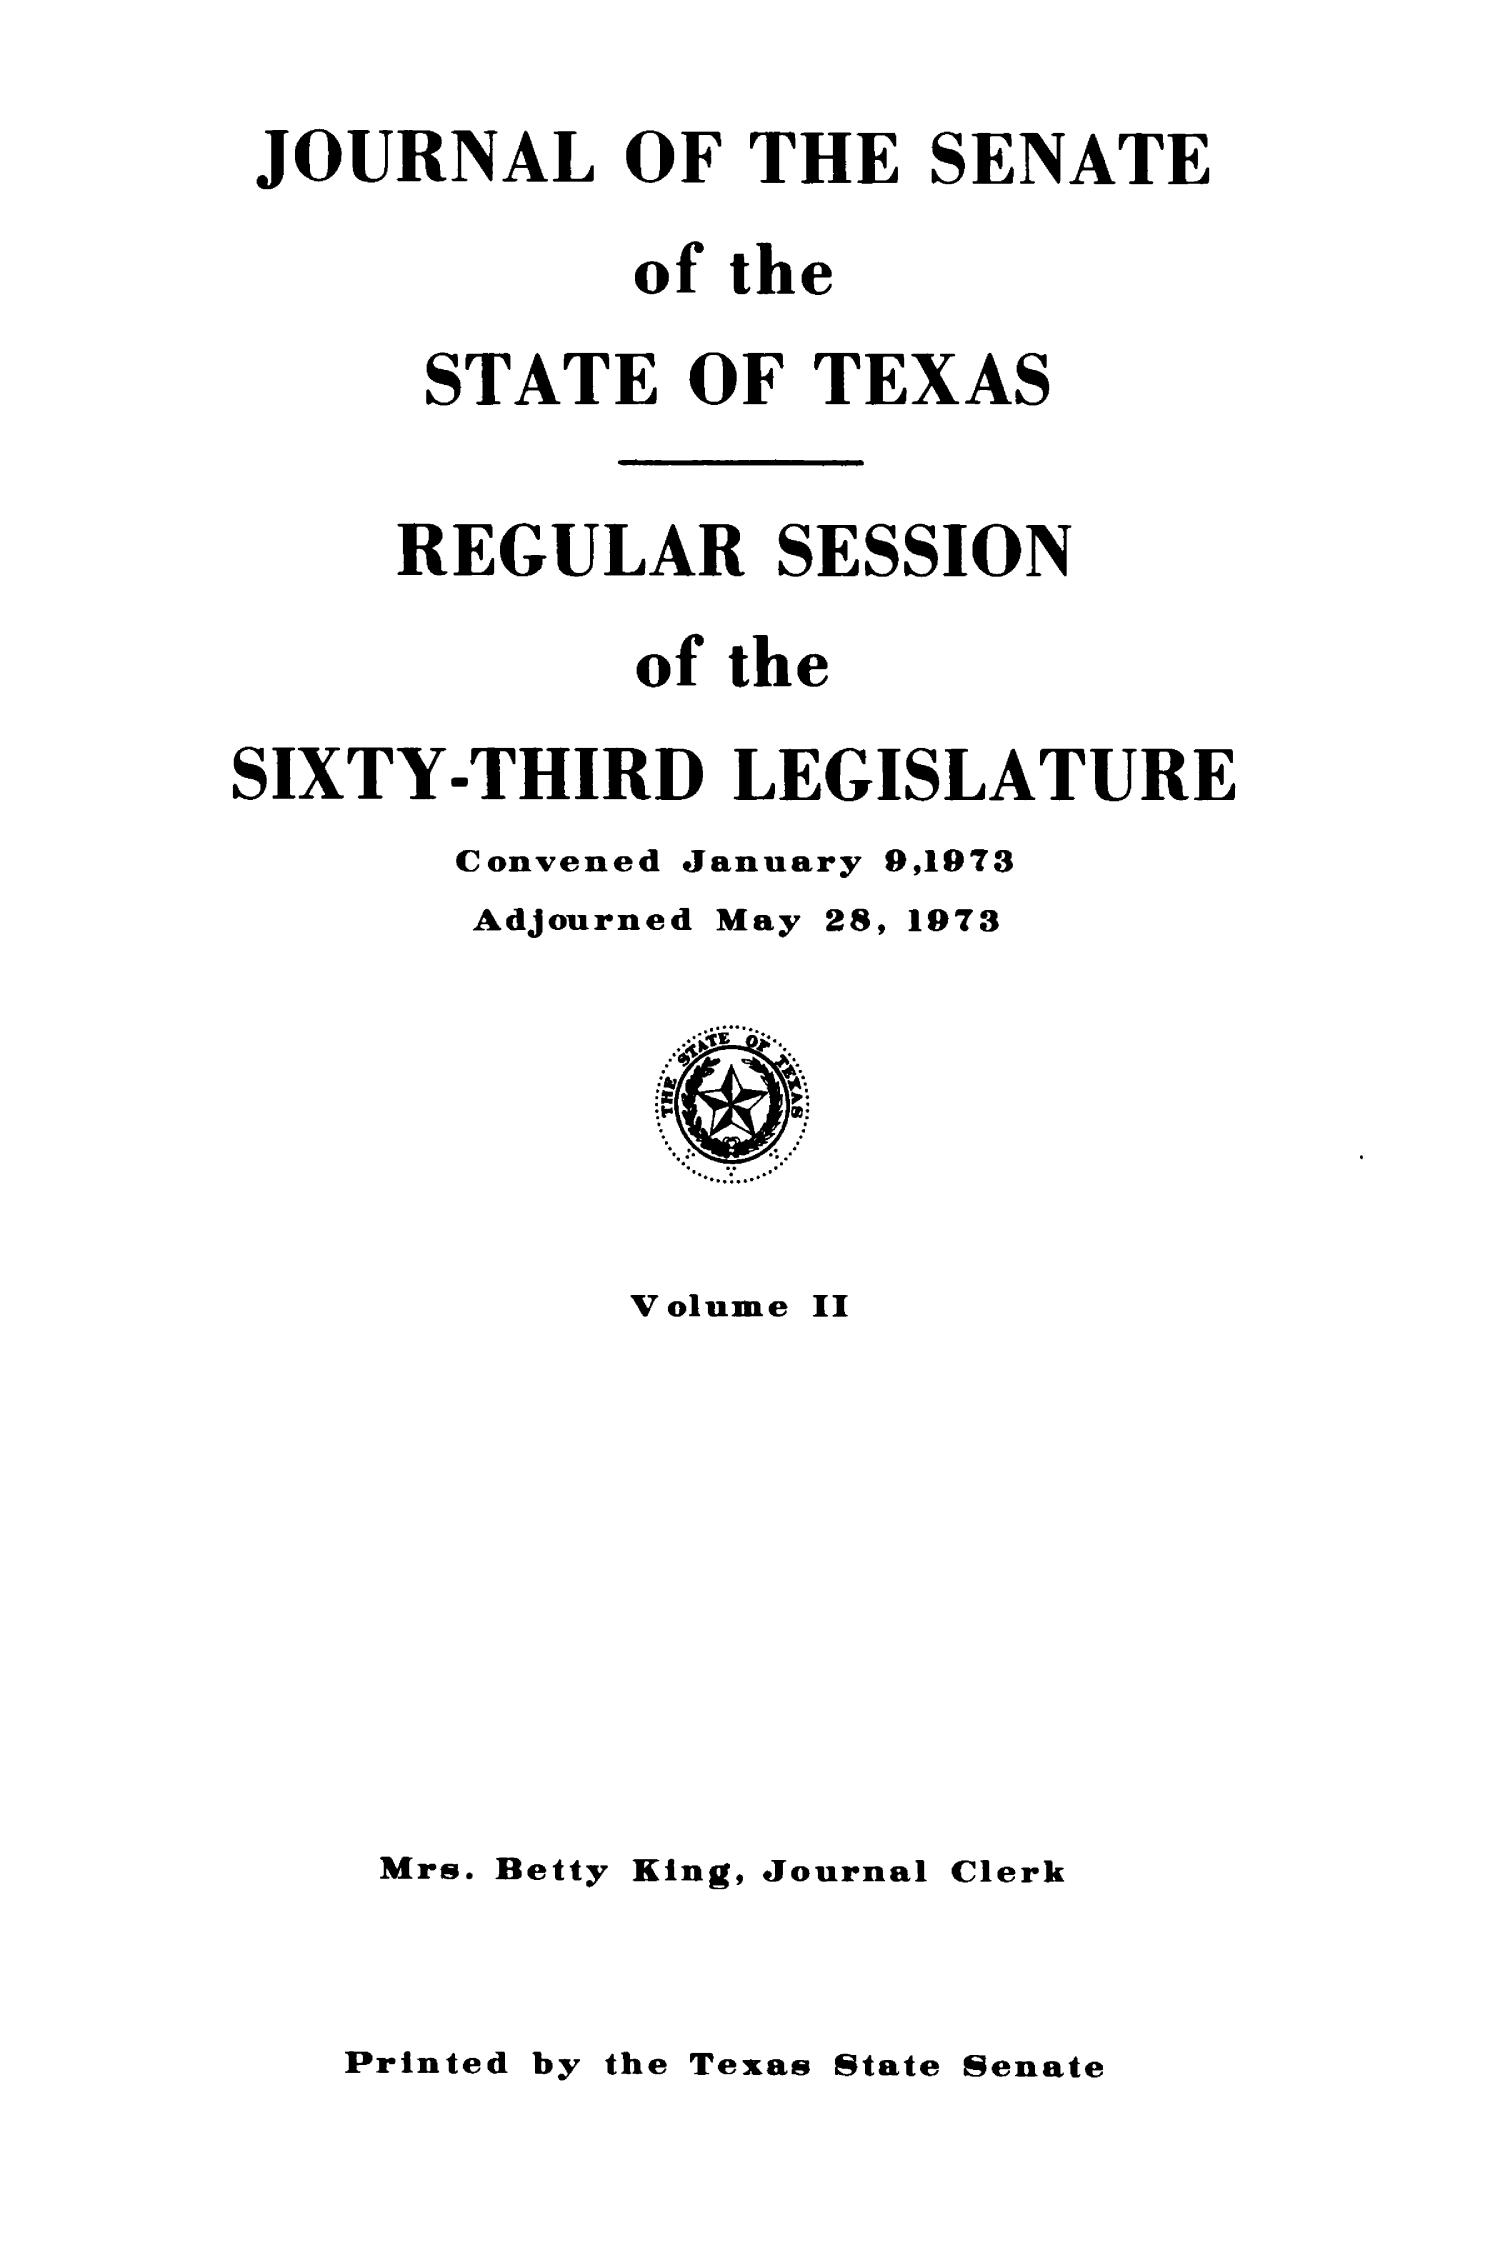 Journal of the Senate of the State of Texas, Regular Session, Volume 2, and Second Called Session of the Sixty-Third Legislature
                                                
                                                    Title Page
                                                